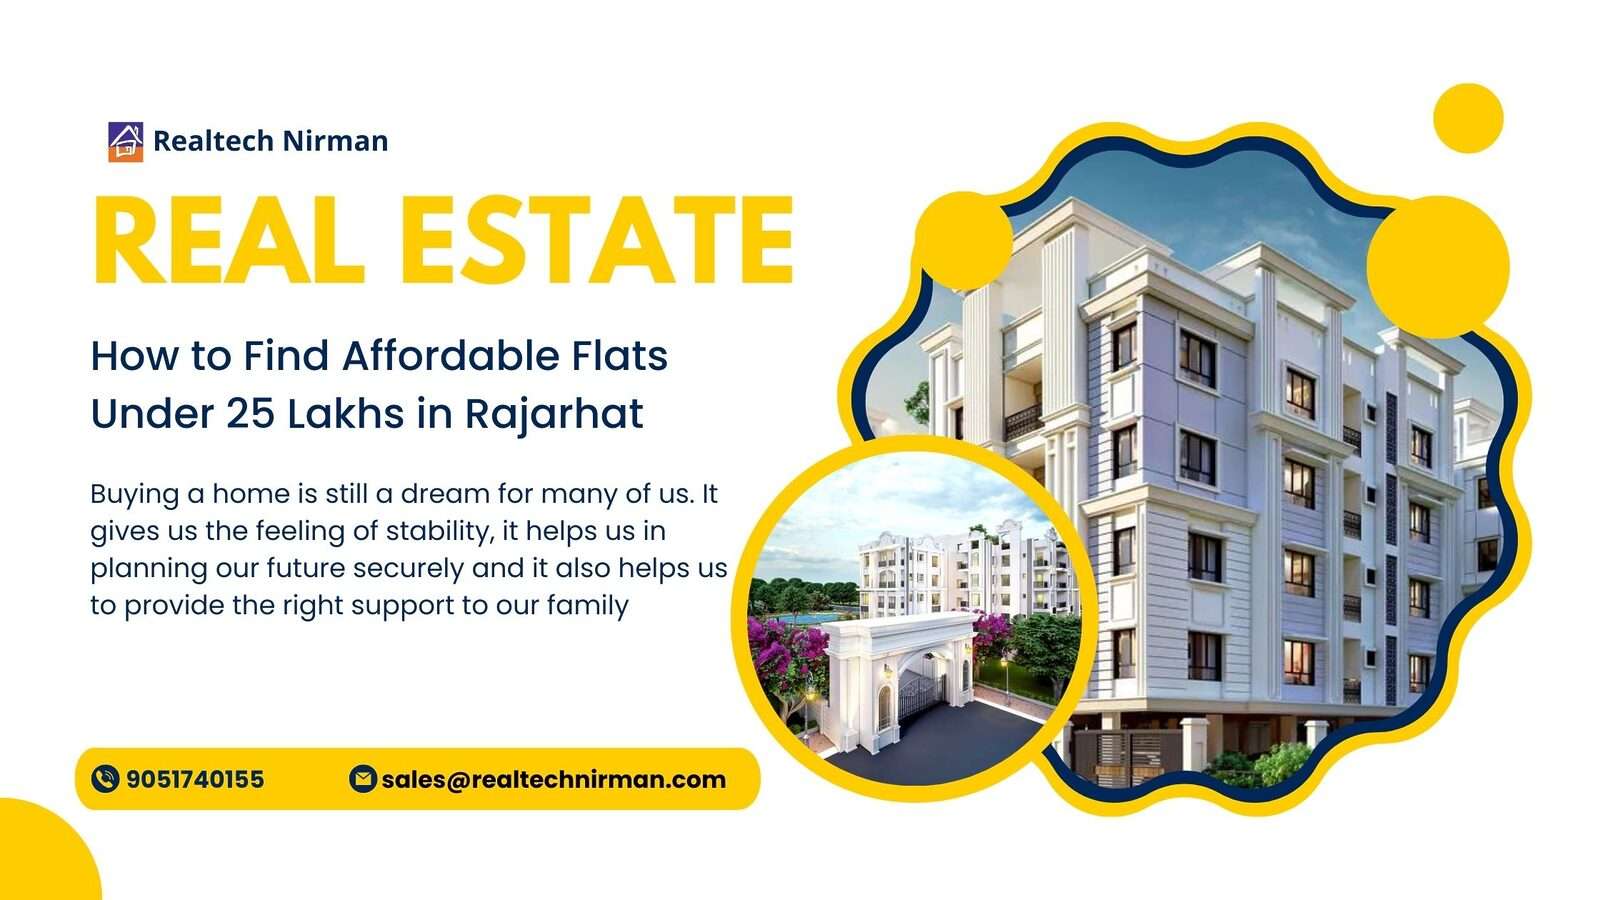 How to Find Affordable Flats Under 25 Lakhs in Rajarhat